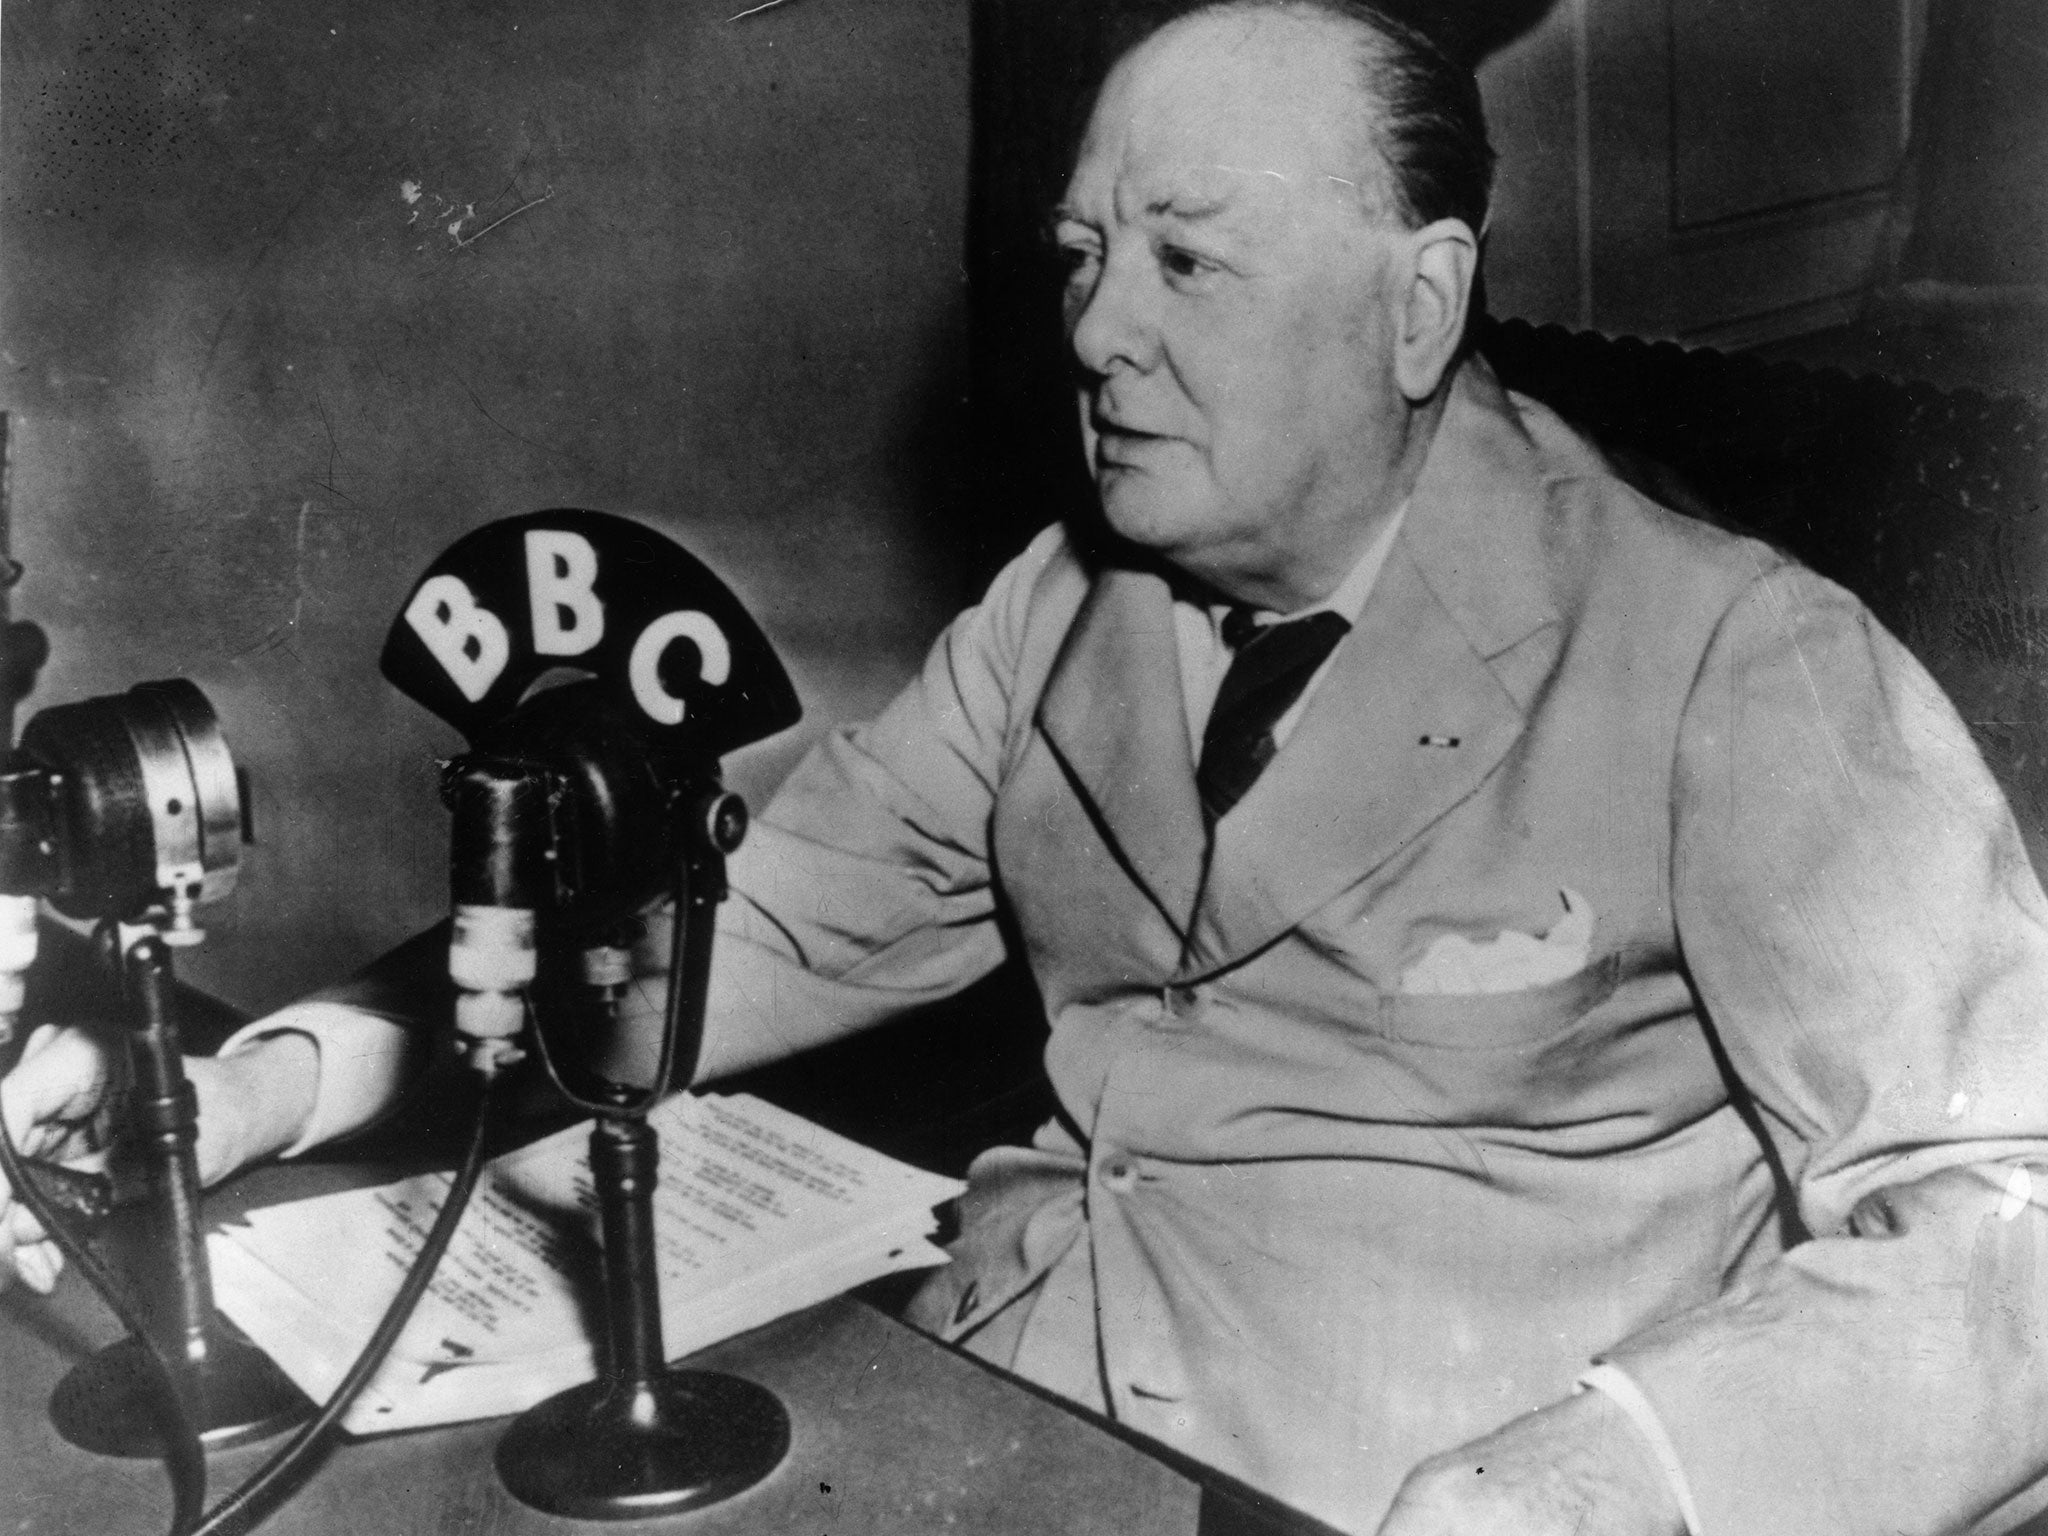 Winston Churchill makes a radio broadcast to the British public from the White House in 1943